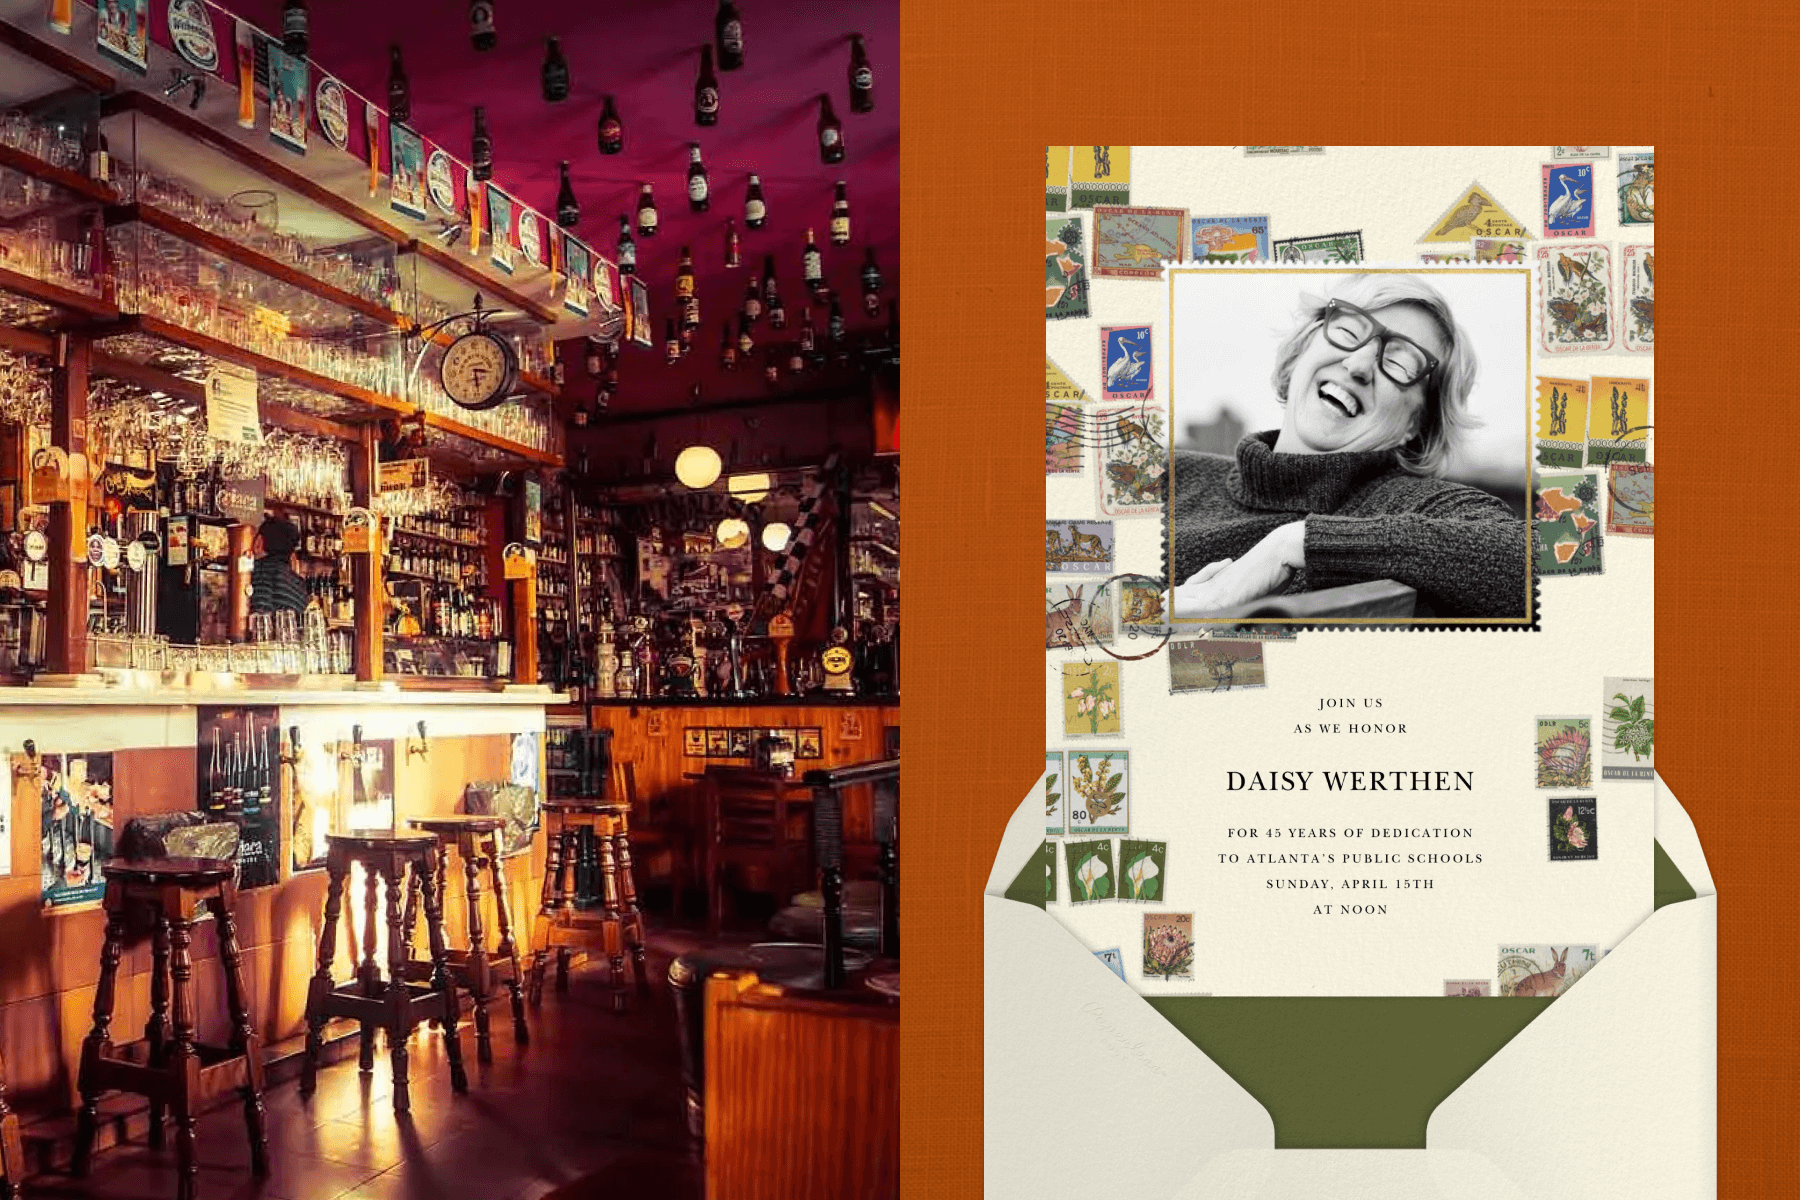 Left: A cluttered wooden bar with a maroon ceiling and beer bottles hanging. Right: A going away party invitation with a black and white photo of a woman laughing and postage stamps around it.